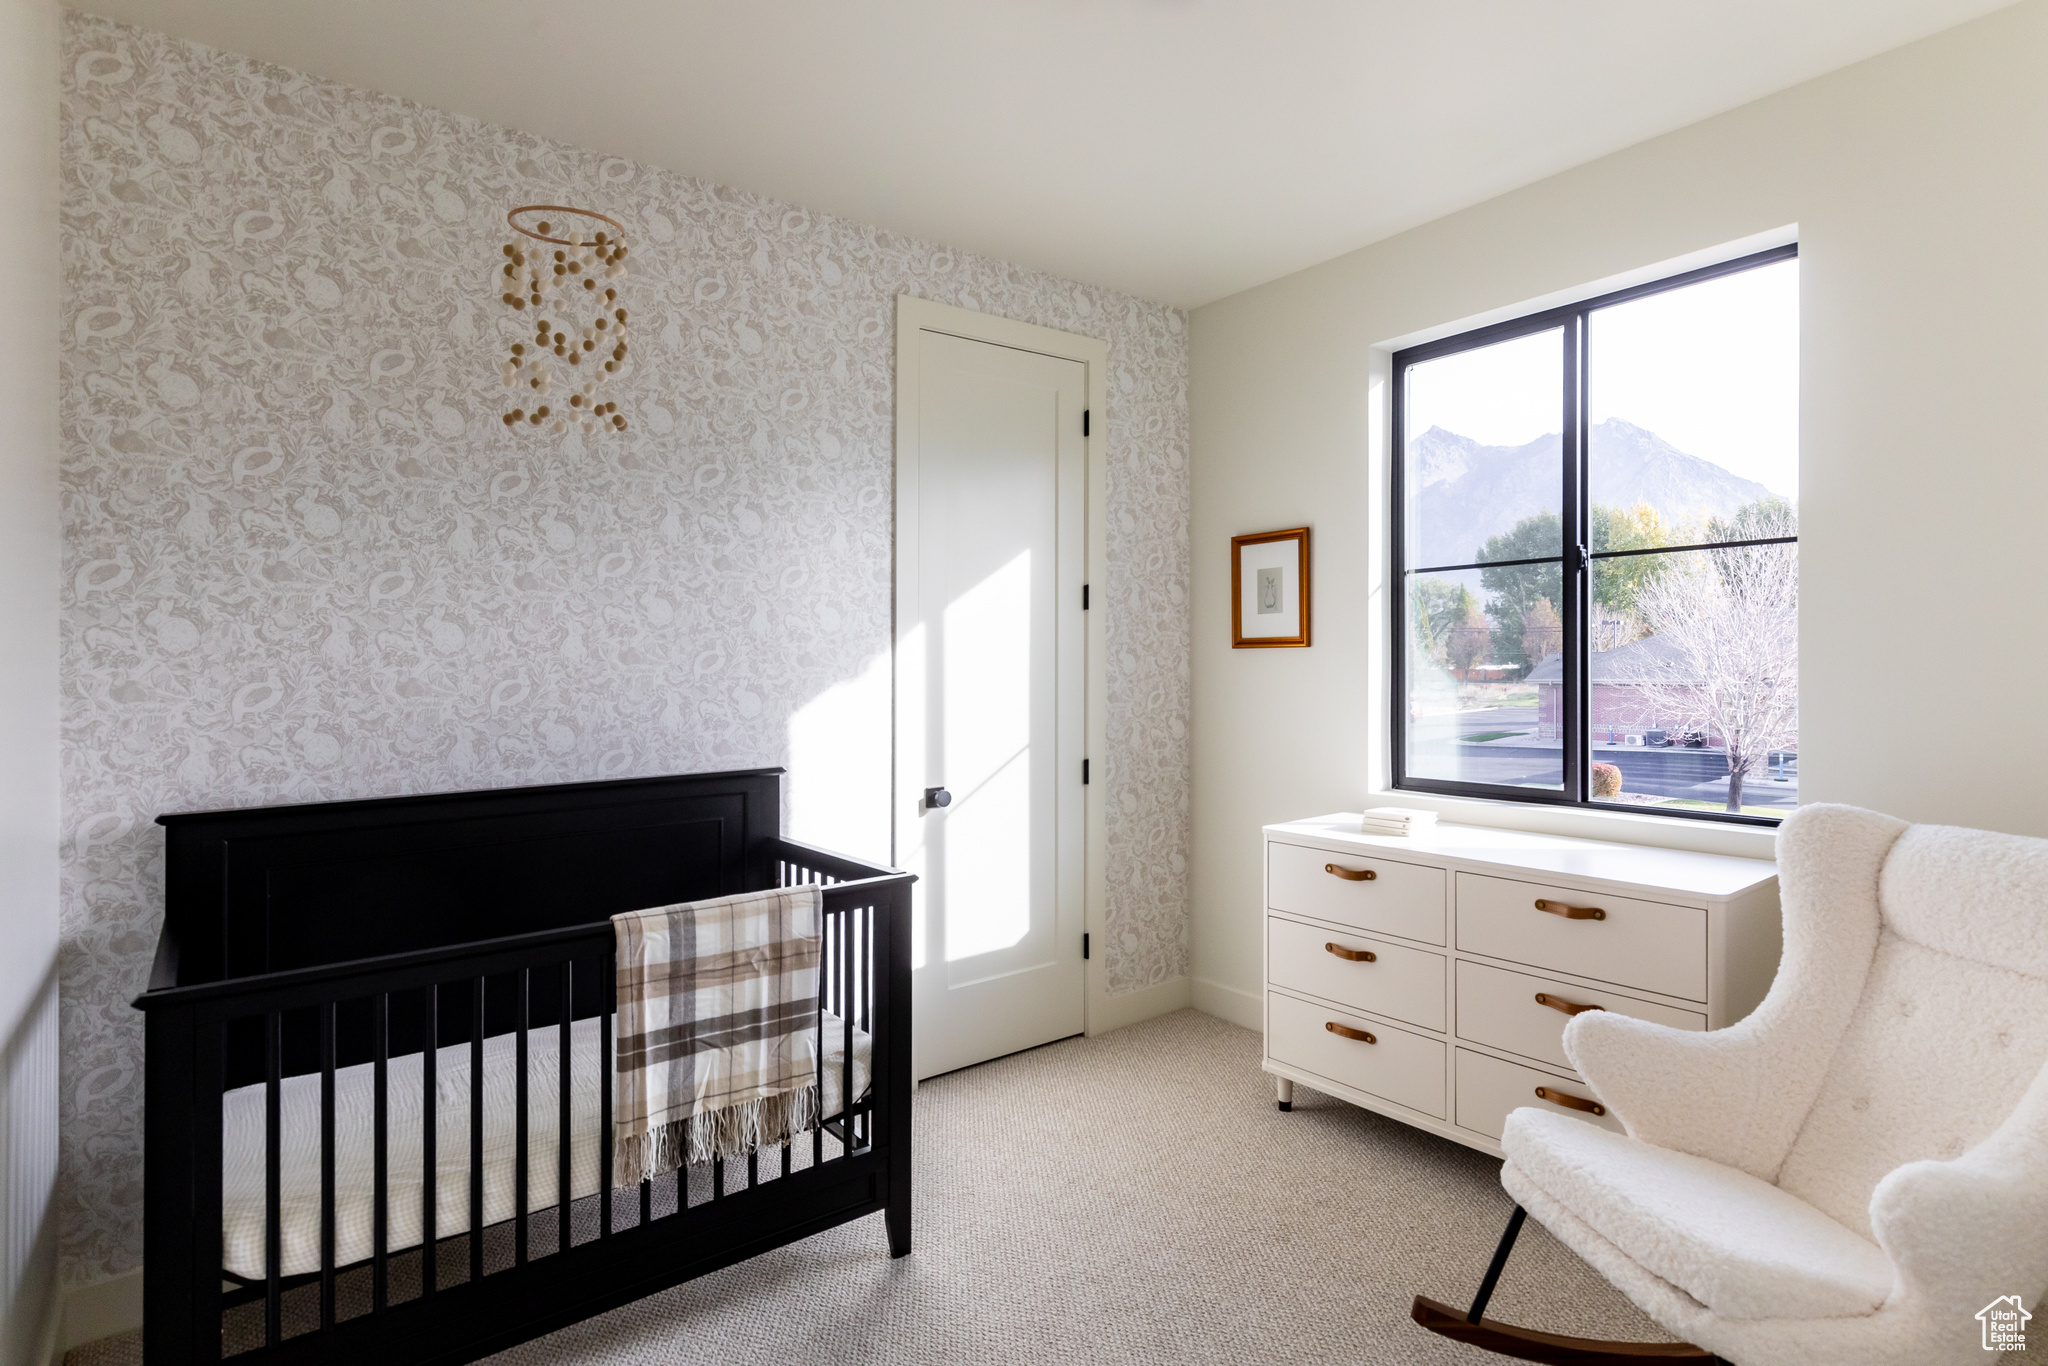 Bedroom featuring light colored carpet, a mountain view, multiple windows, and a nursery area